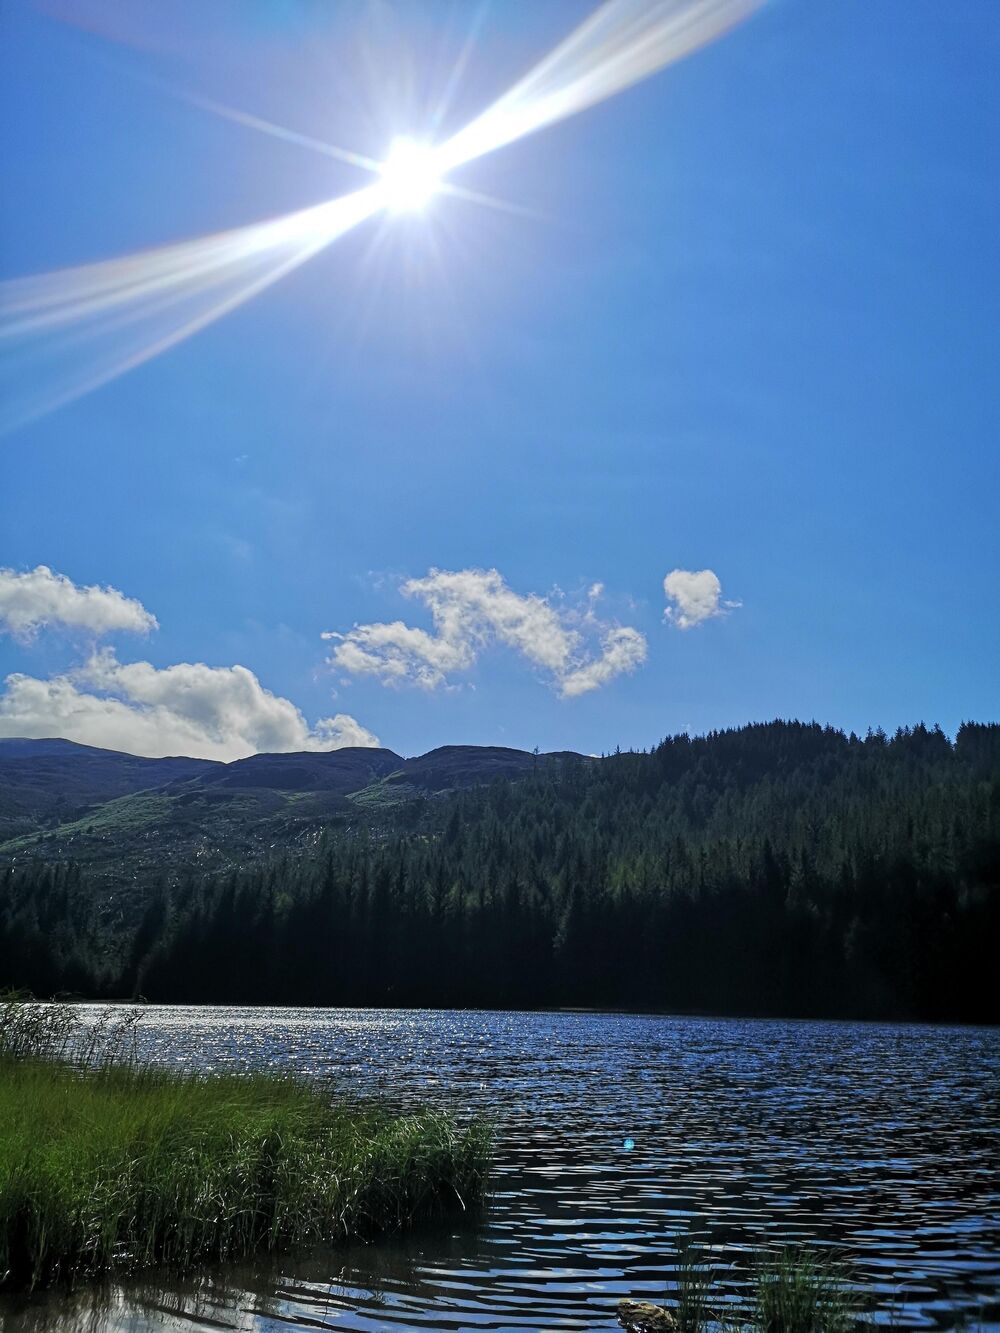 The sun shimmers on the ripples in a loch on a summer day. The sky and water are bright blue, with the rays gleaming in the sky. Mountains and woodland can be seen behind the loch.